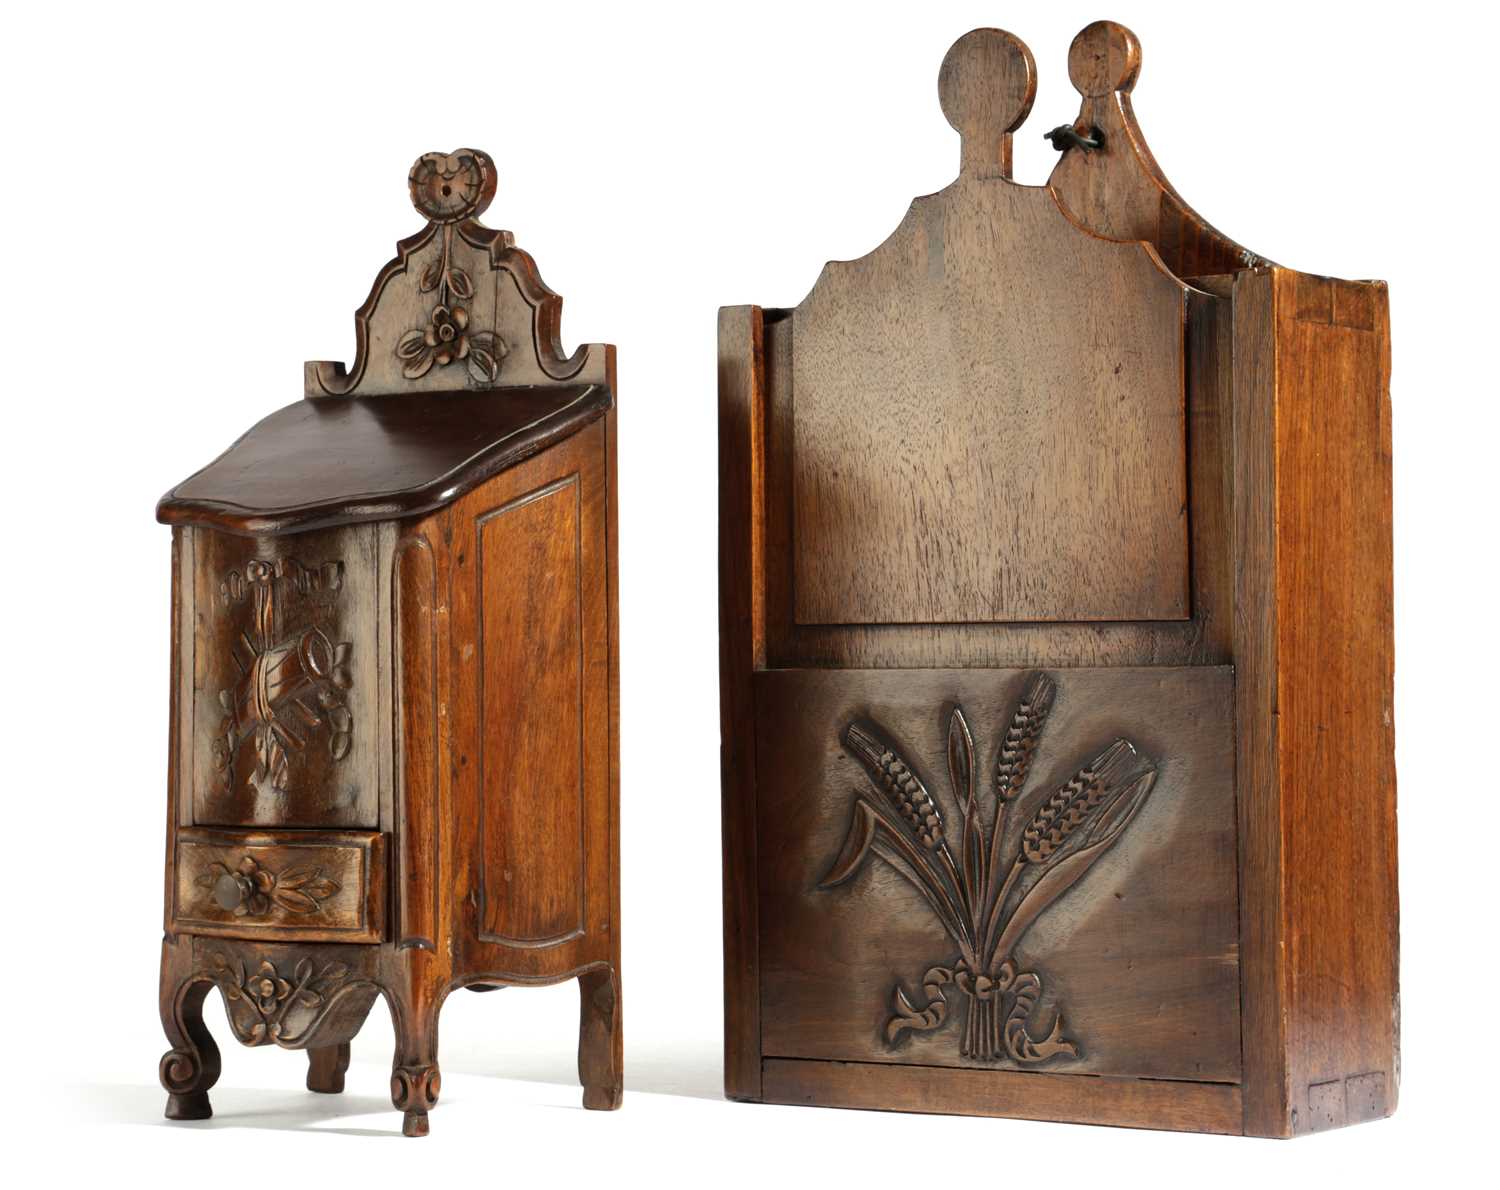 A FRENCH PROVINCIAL WALNUT CANDLE BOX LATE 18TH / EARLY 19TH CENTURYwith a sliding cover and